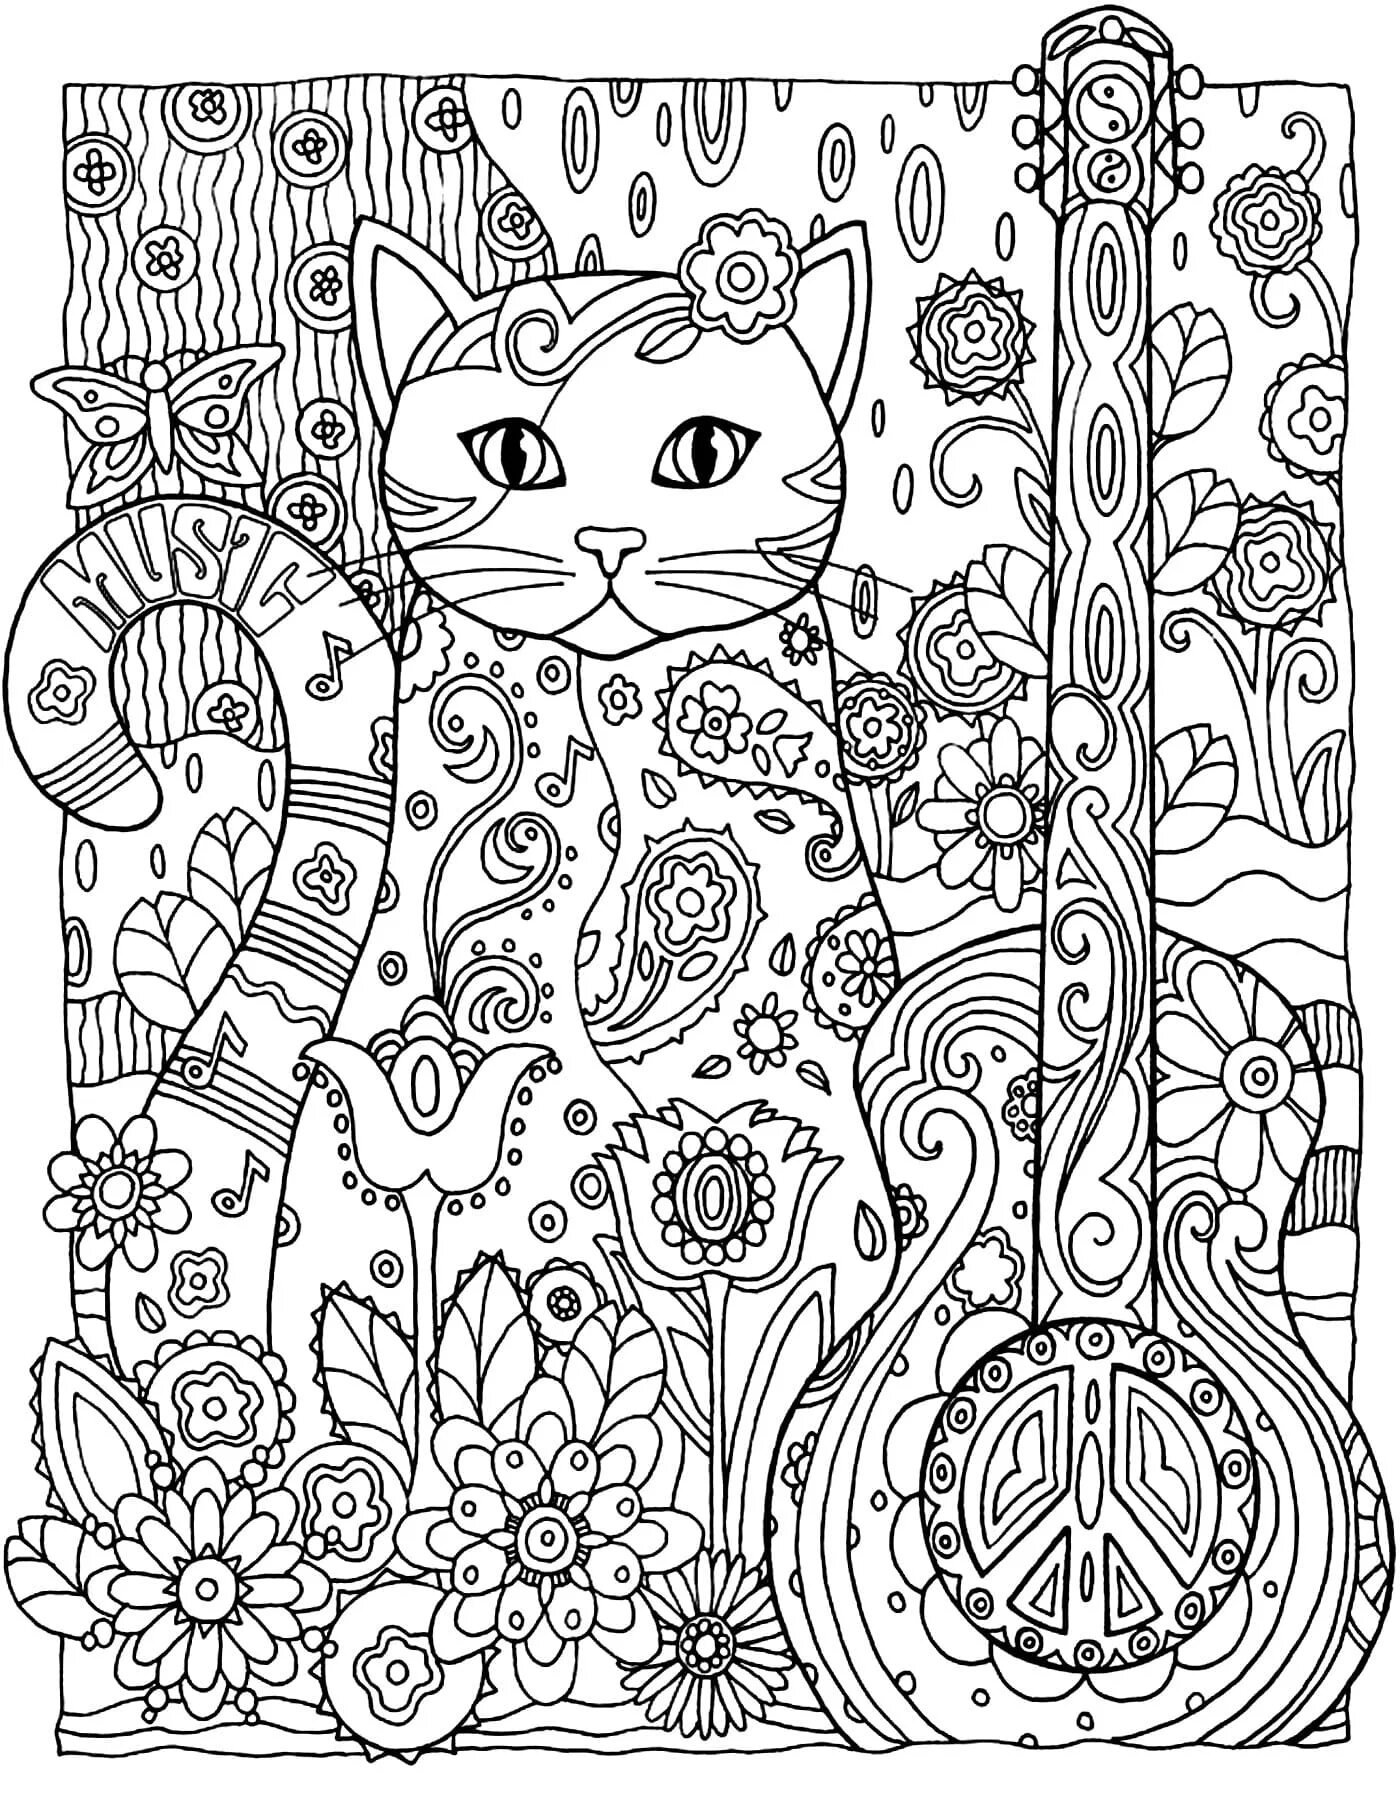 Great patterned cat coloring page